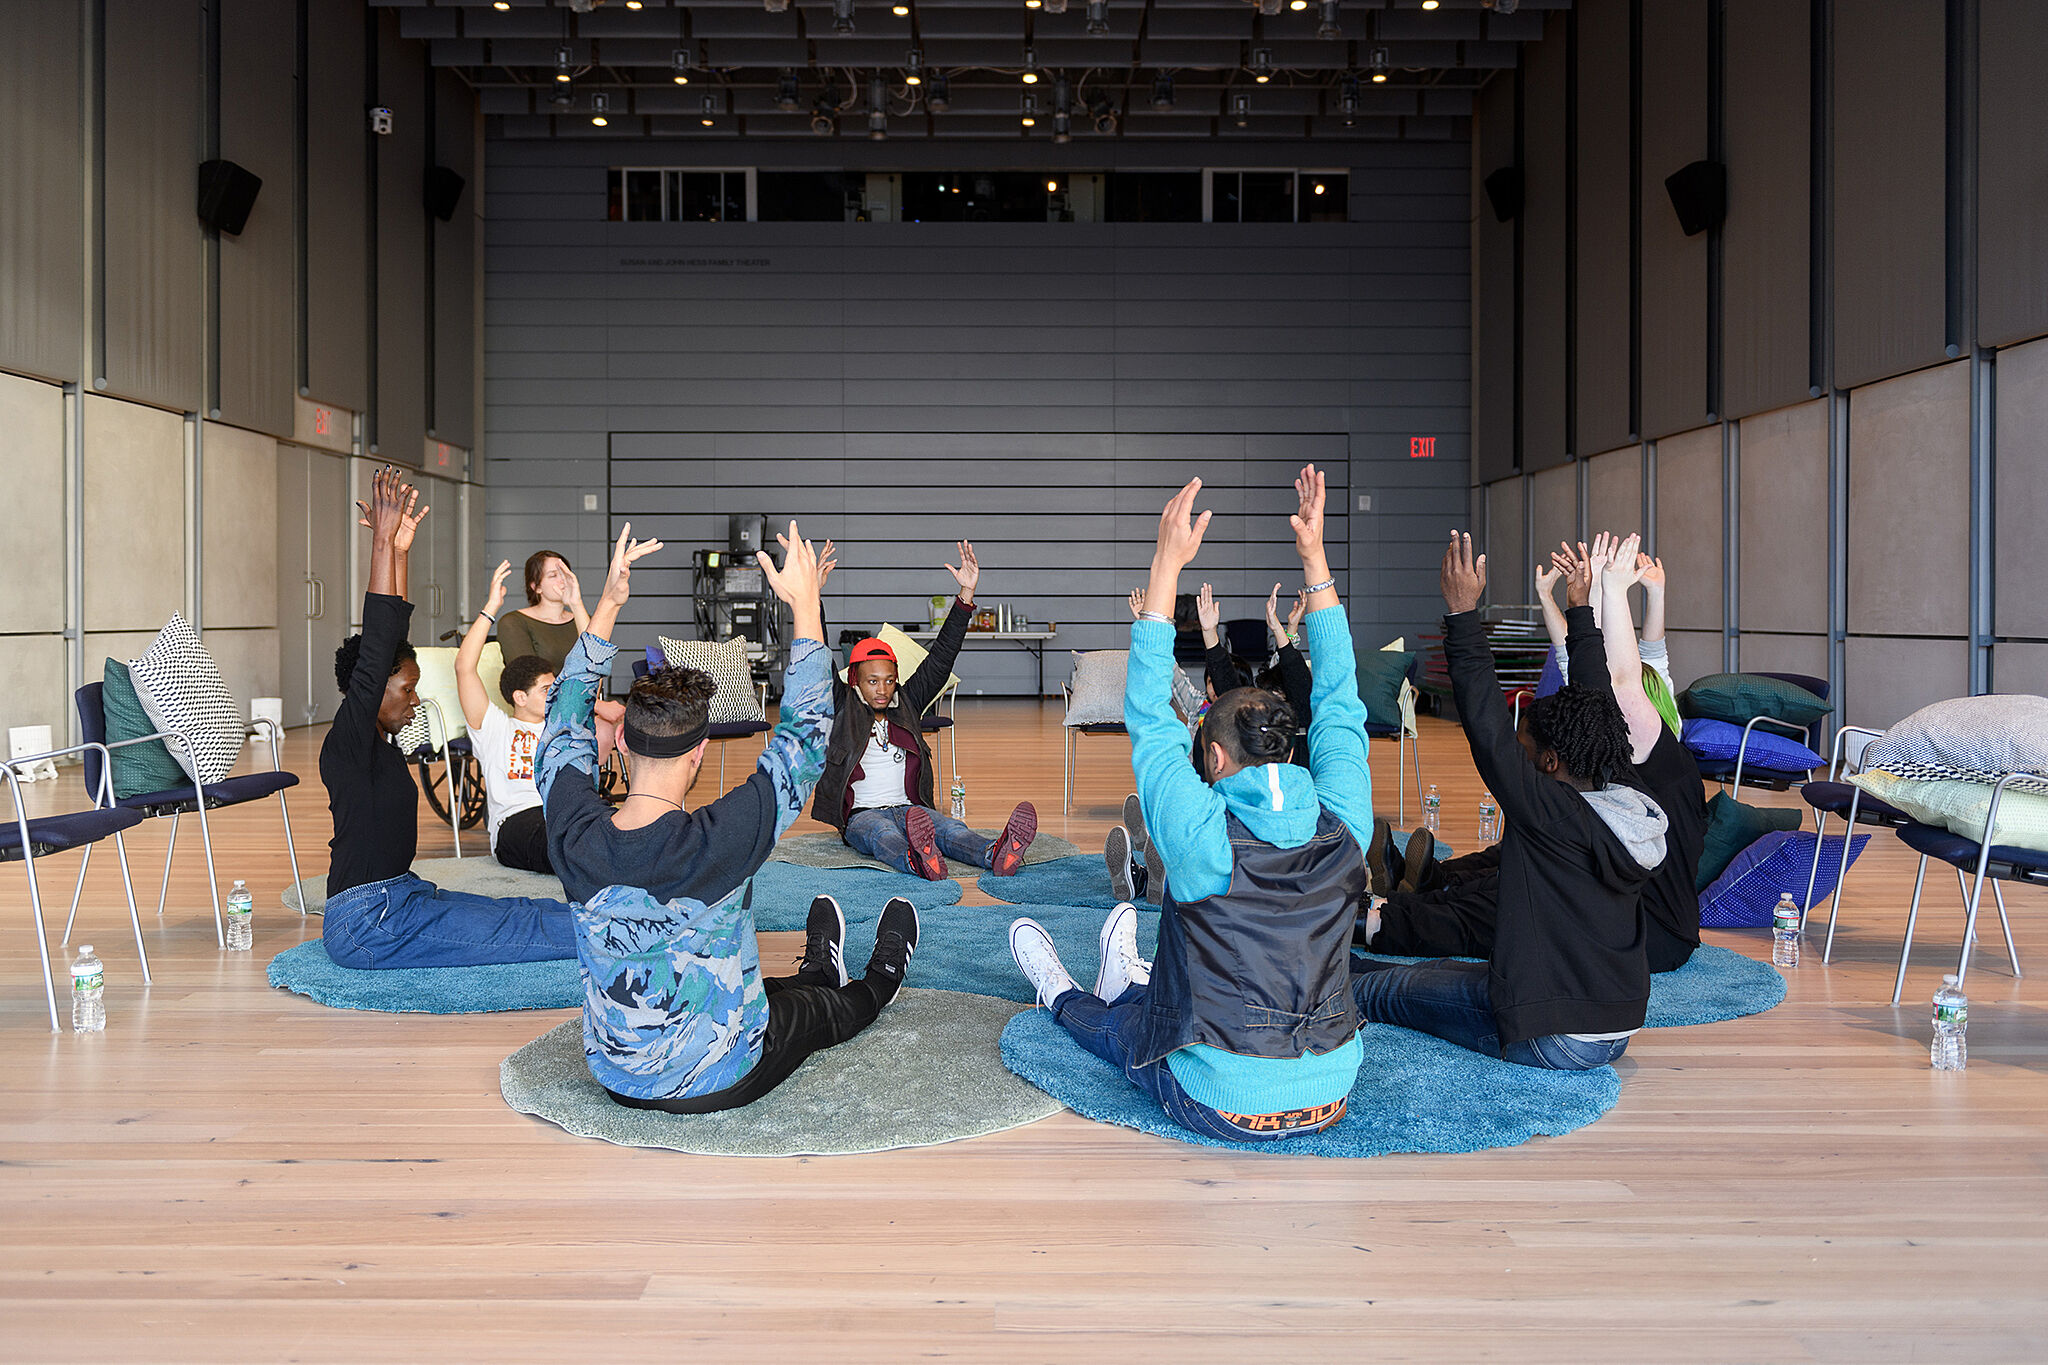 A photo of a group of people sitting on the floor in a circle, with hands raised above their heads.